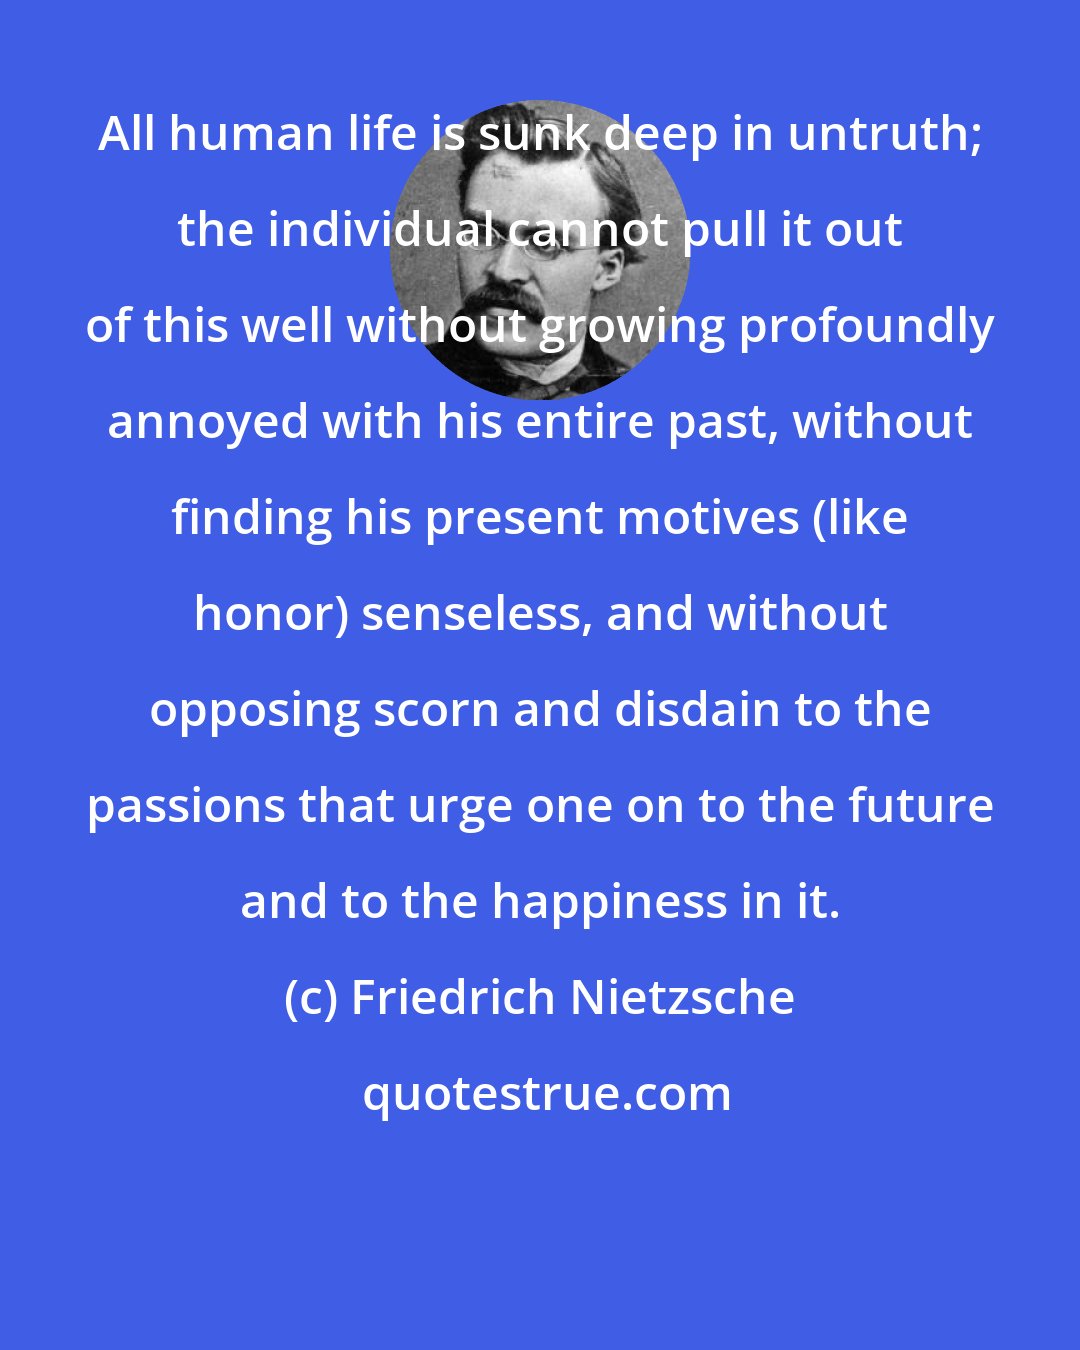 Friedrich Nietzsche: All human life is sunk deep in untruth; the individual cannot pull it out of this well without growing profoundly annoyed with his entire past, without finding his present motives (like honor) senseless, and without opposing scorn and disdain to the passions that urge one on to the future and to the happiness in it.